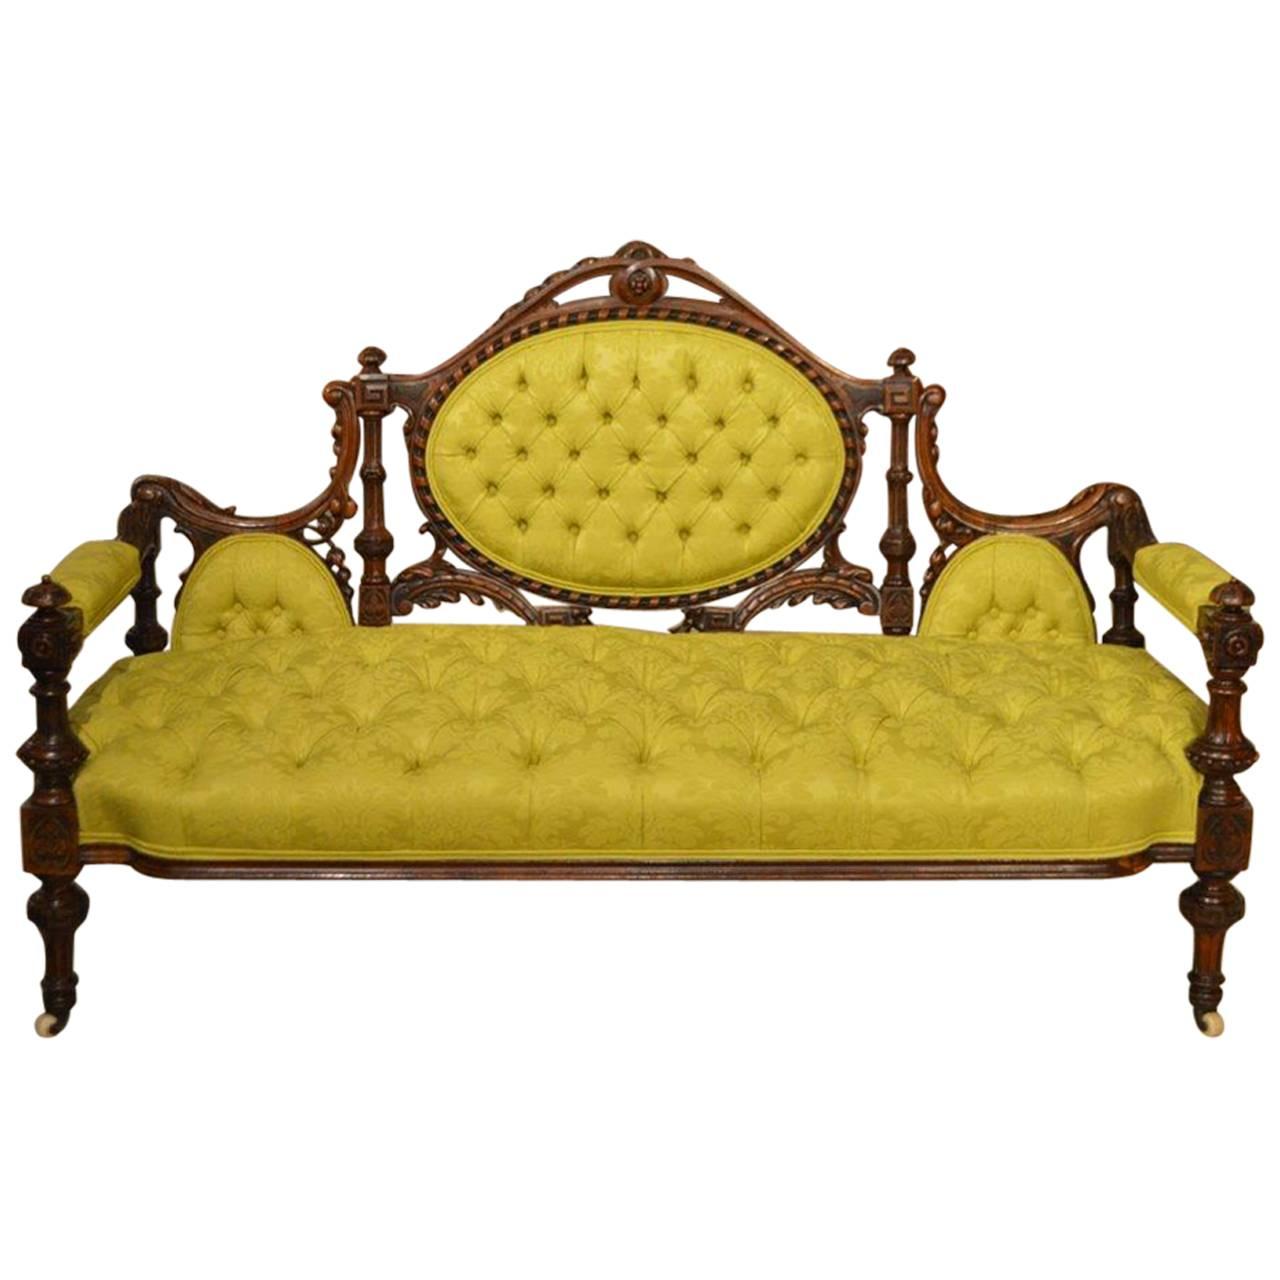 Superb Quality Carved Walnut Victorian Period Antique Sofa/Chaise